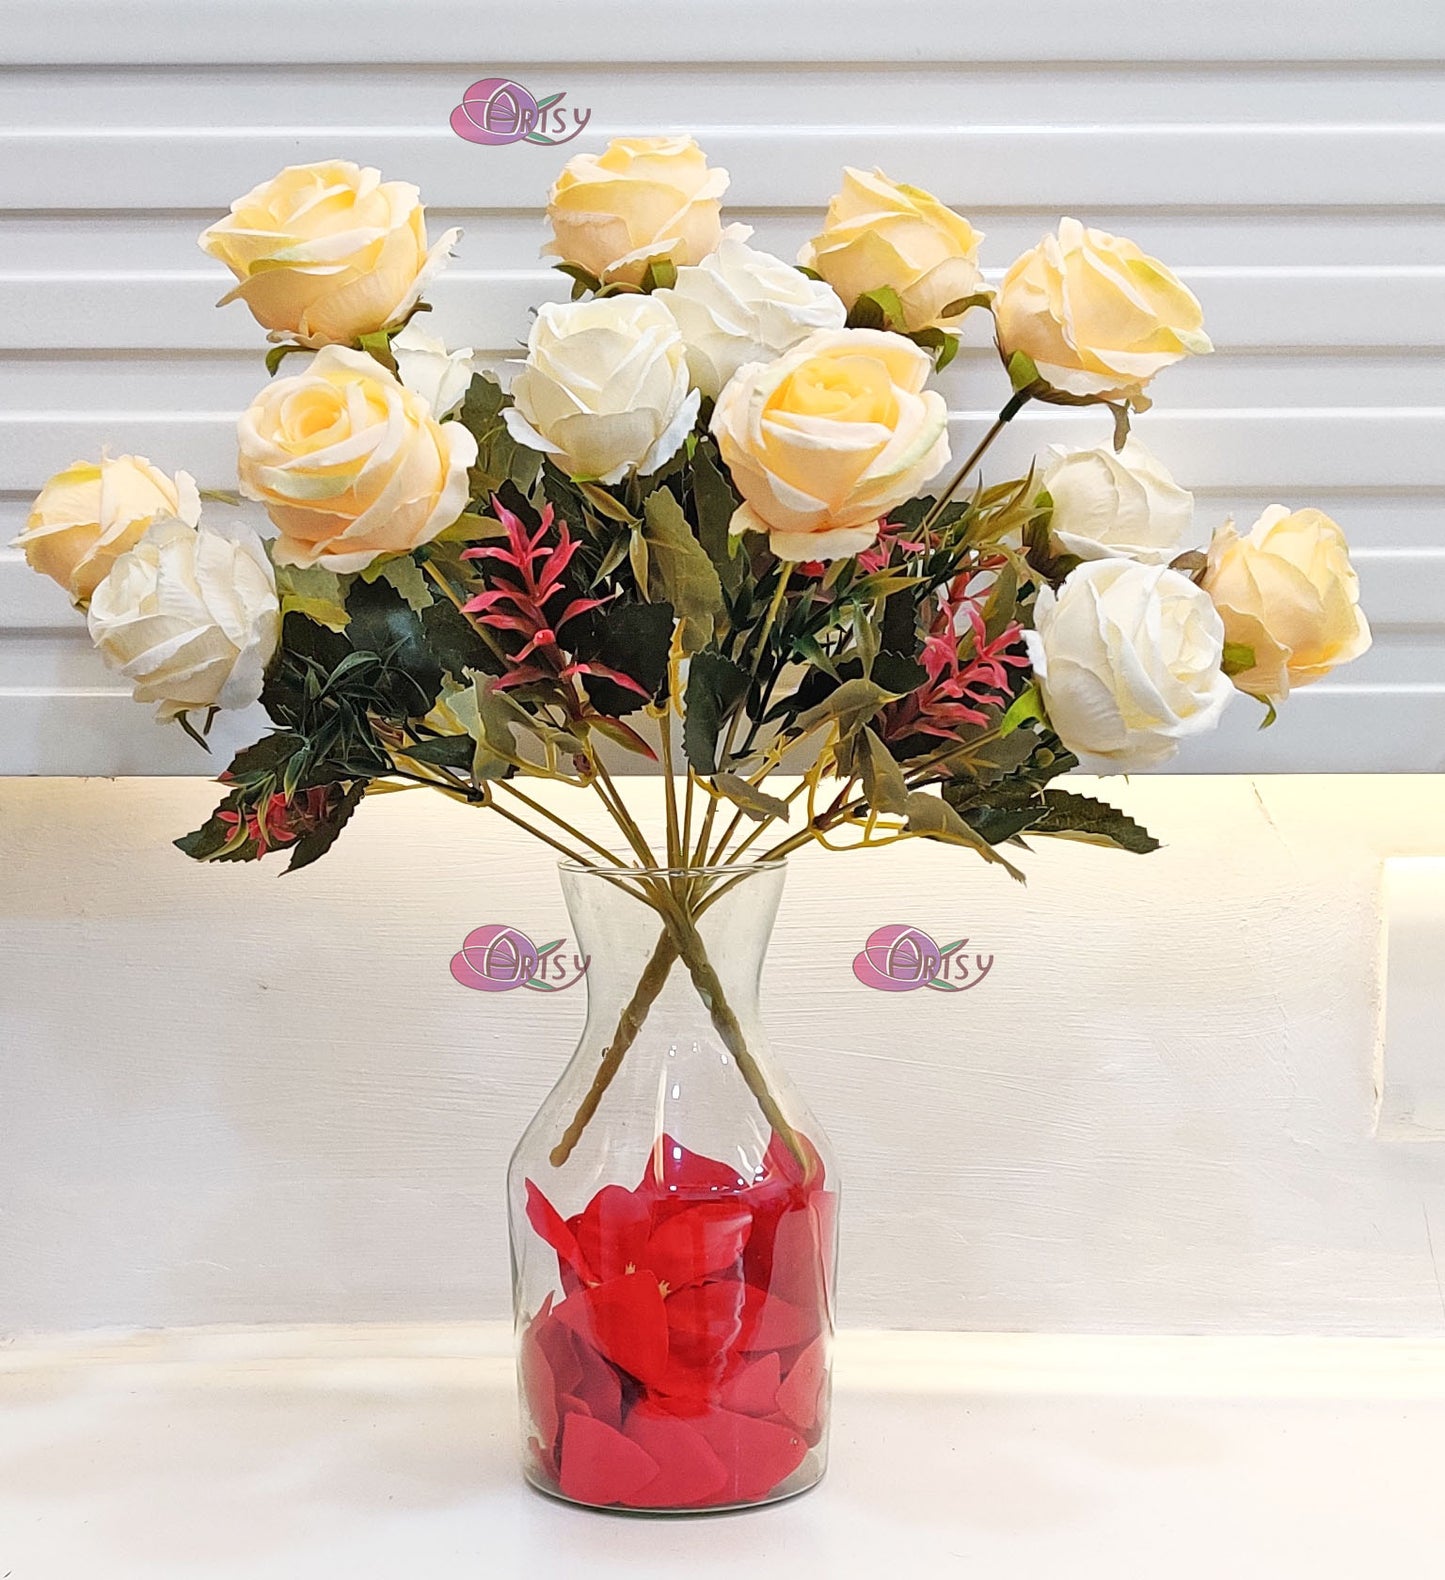 Forever Blooms: Lifelike Artificial Rose Flower For Vase Filler, Home Decoration, DIY craft And Many More, Combo pack of 2 Pieces, Without Vase